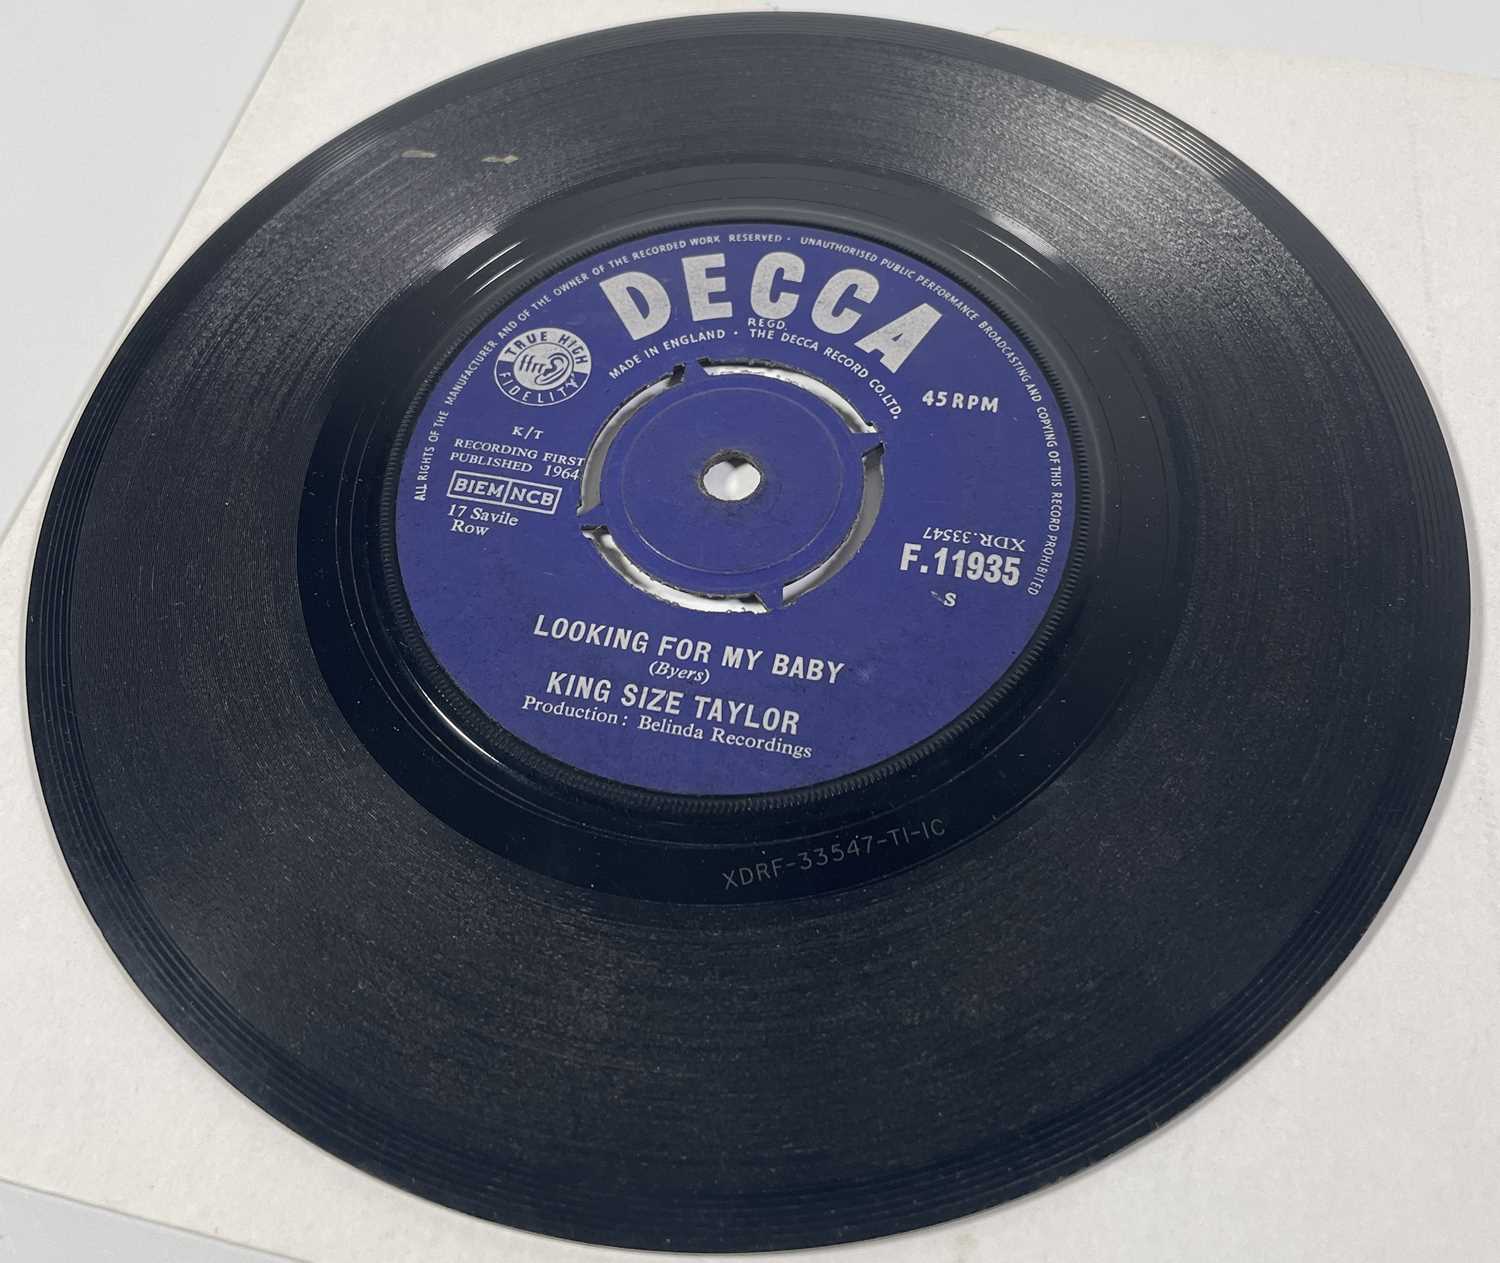 KING SIZE TAYLOR - SOMEBODY'S ALREADY TRYING 7" (ORIGINAL UK COPY - DECCA F.11935) - Image 3 of 4